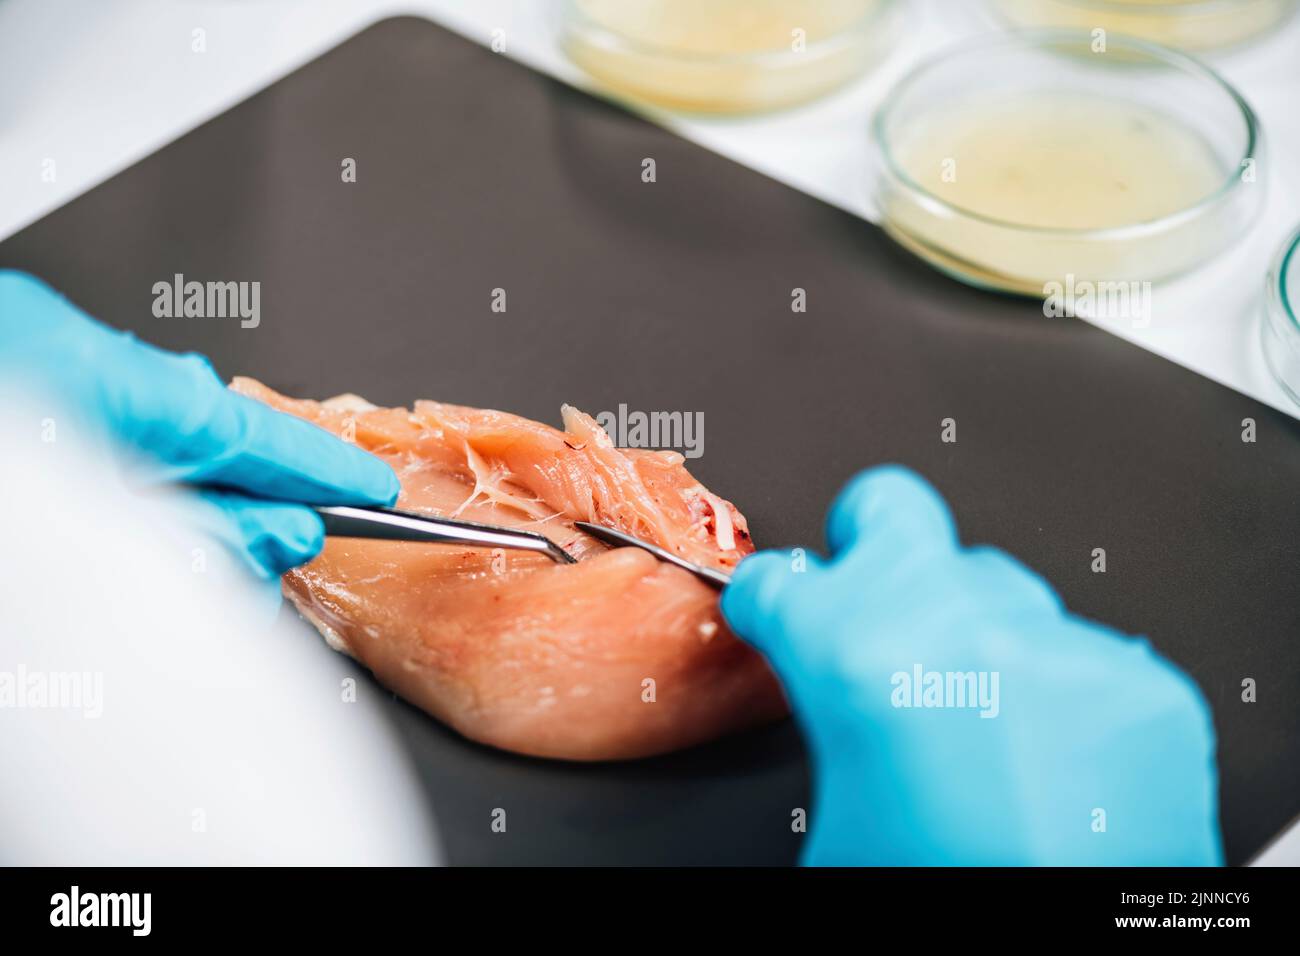 Quality control inspector taking poultry sample Stock Photo